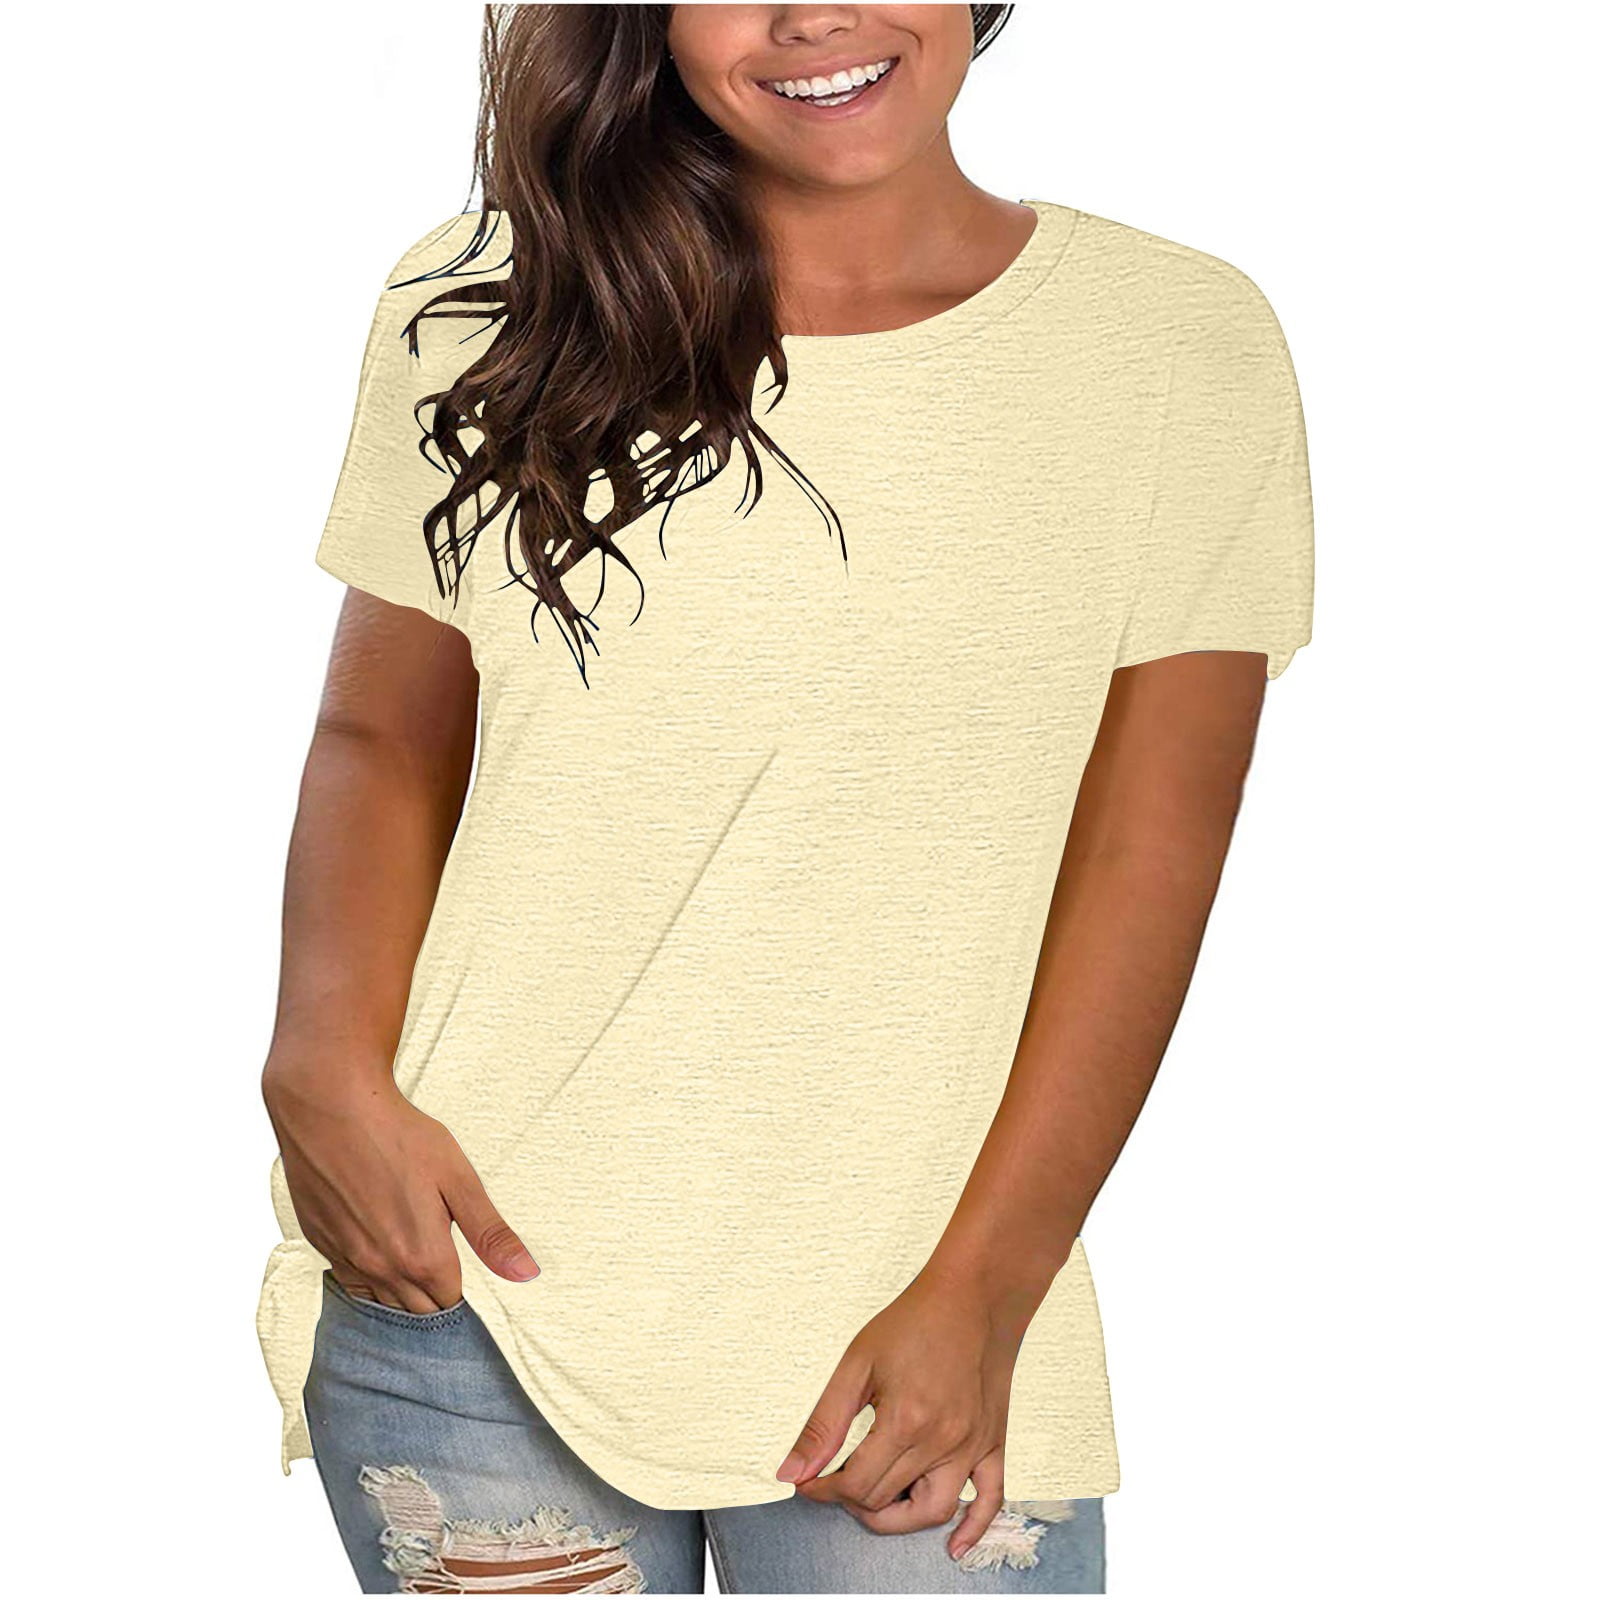  Tops for Women Trendy Summer Cotton Comfy Half Sleeve Womens  Shirts Round Neck Plus Size Blouses for Women Baggy Solid Color Womens Summer  Outfits Short Sleeves Beige S : Sports 